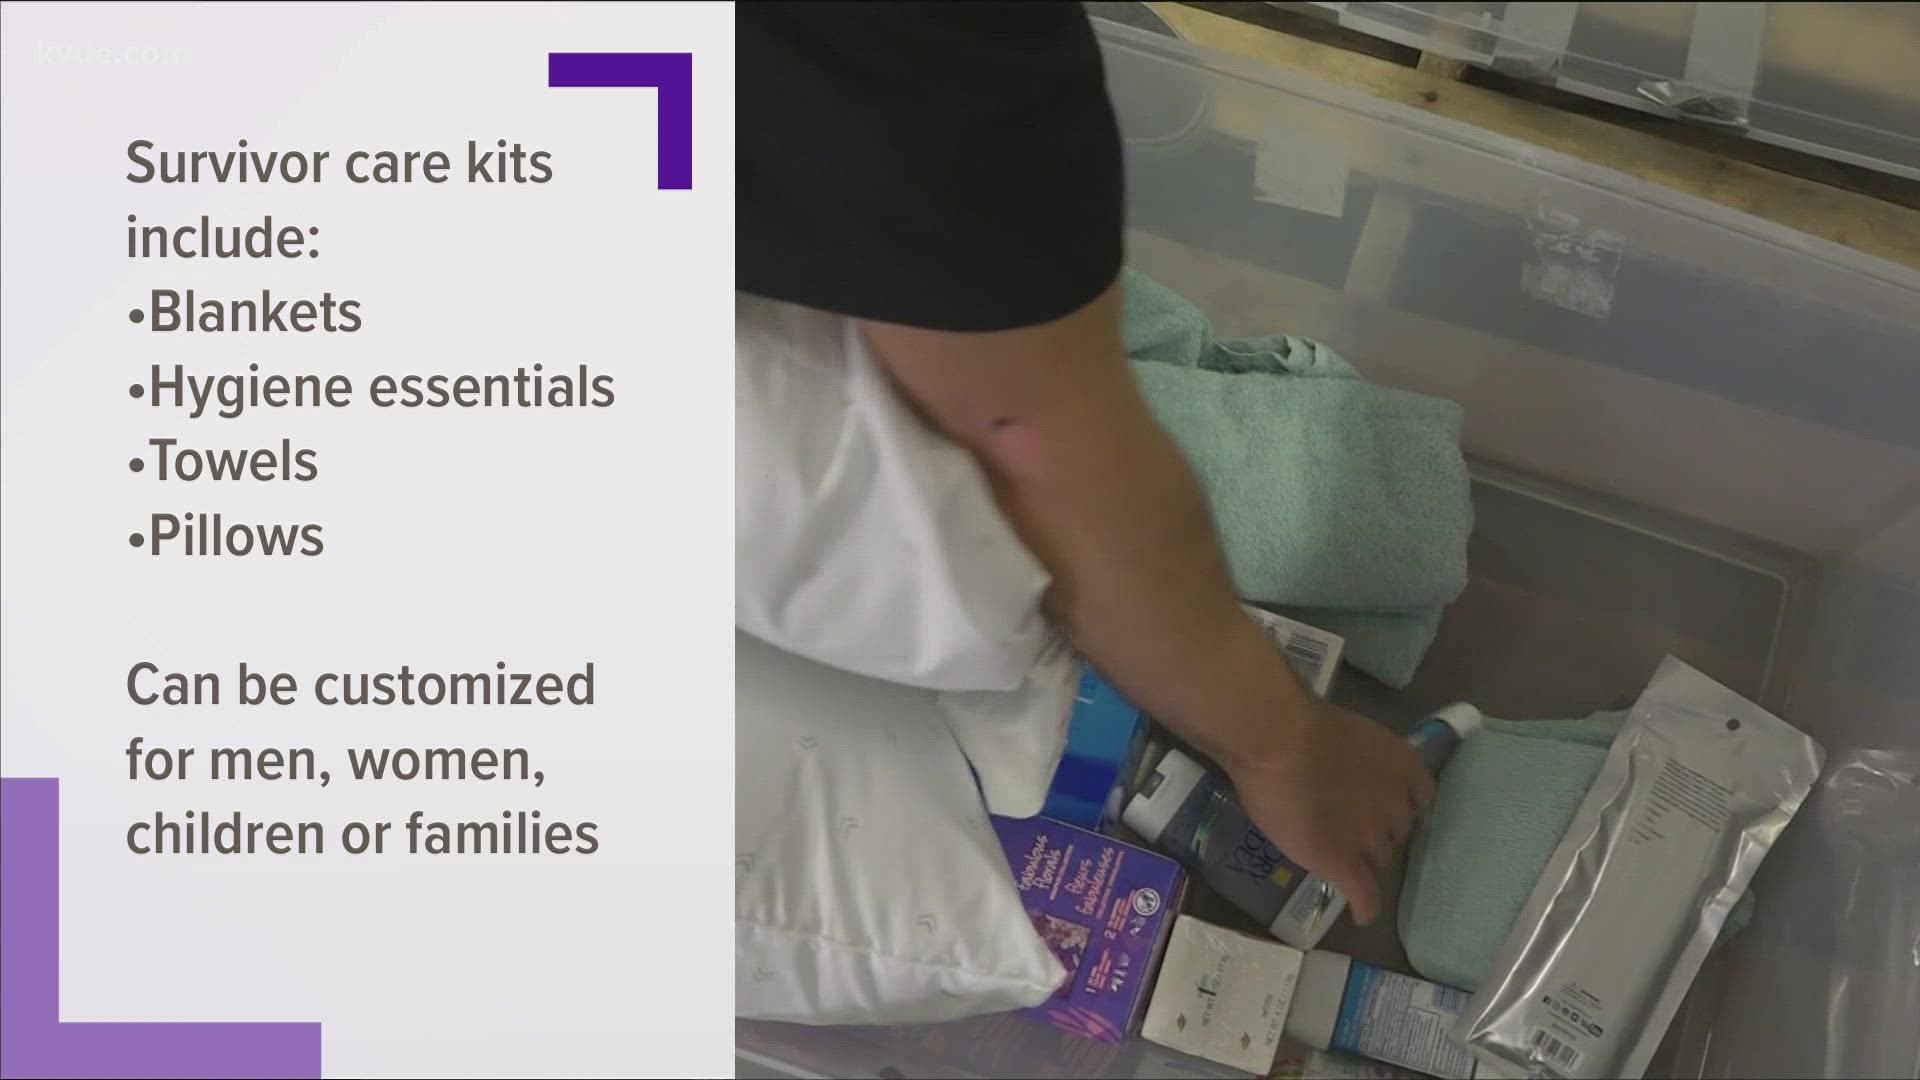 ADRN is asking for 5,000 care kits. You can drop your kit off at the HOPE Family Thrift Store in Austin.